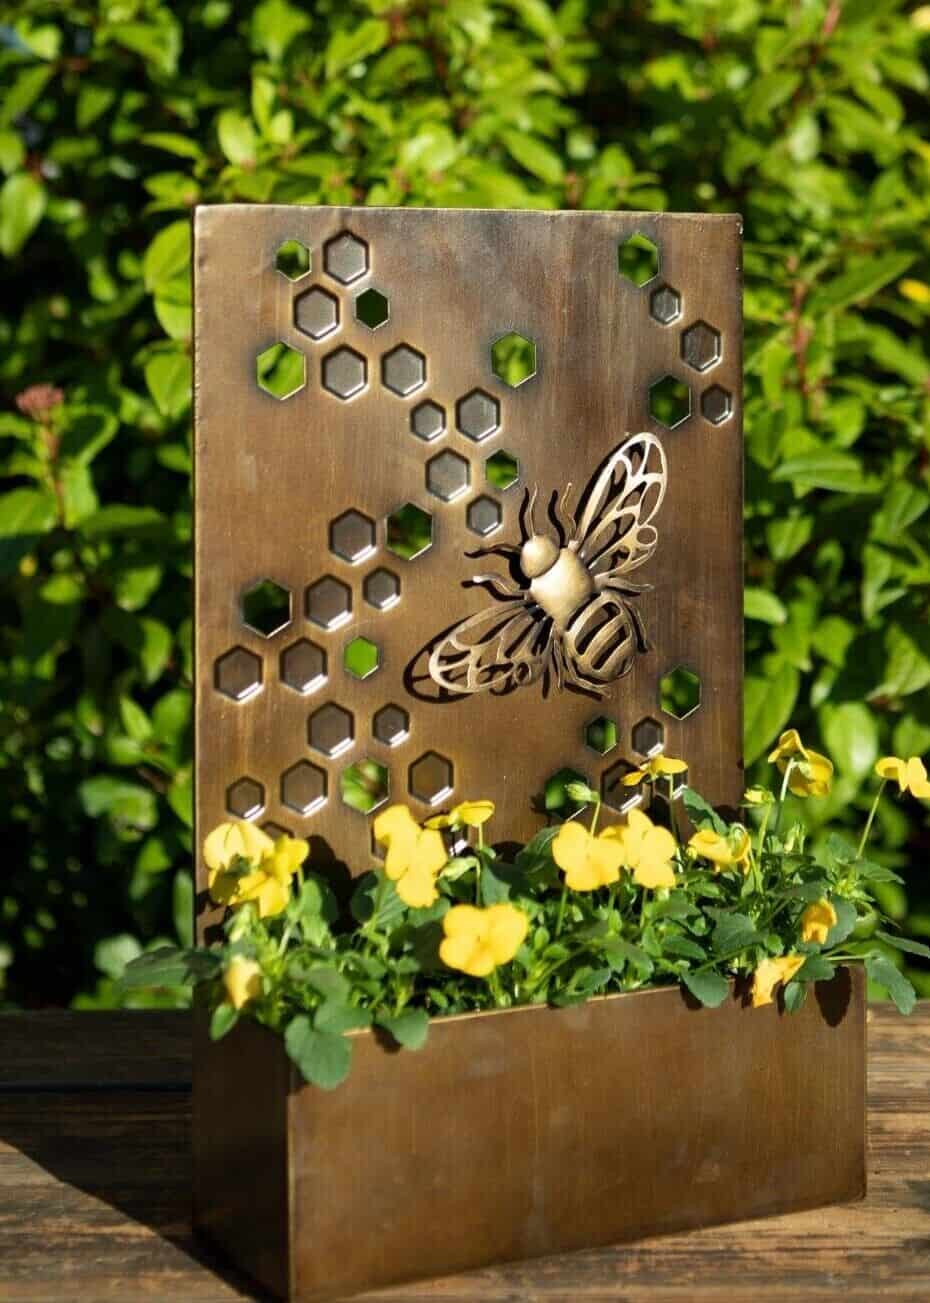 A metal sheet with planter at base with bee design and copper finish. Situated on the decking of a British garden with green foliage in background.